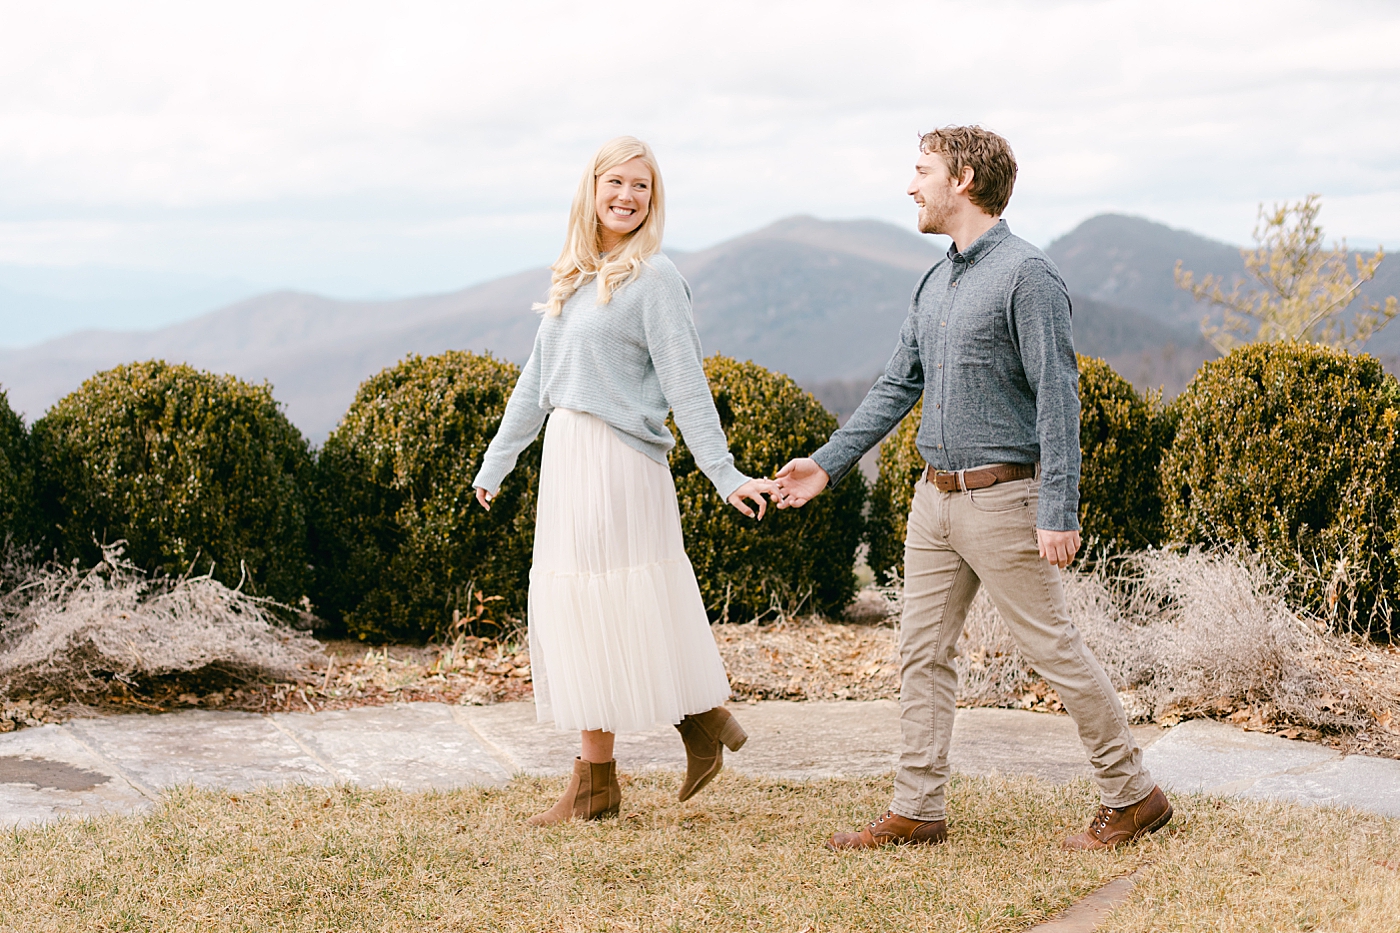 Couple holding hands in the mountains | Image by Hope Helmuth Photography